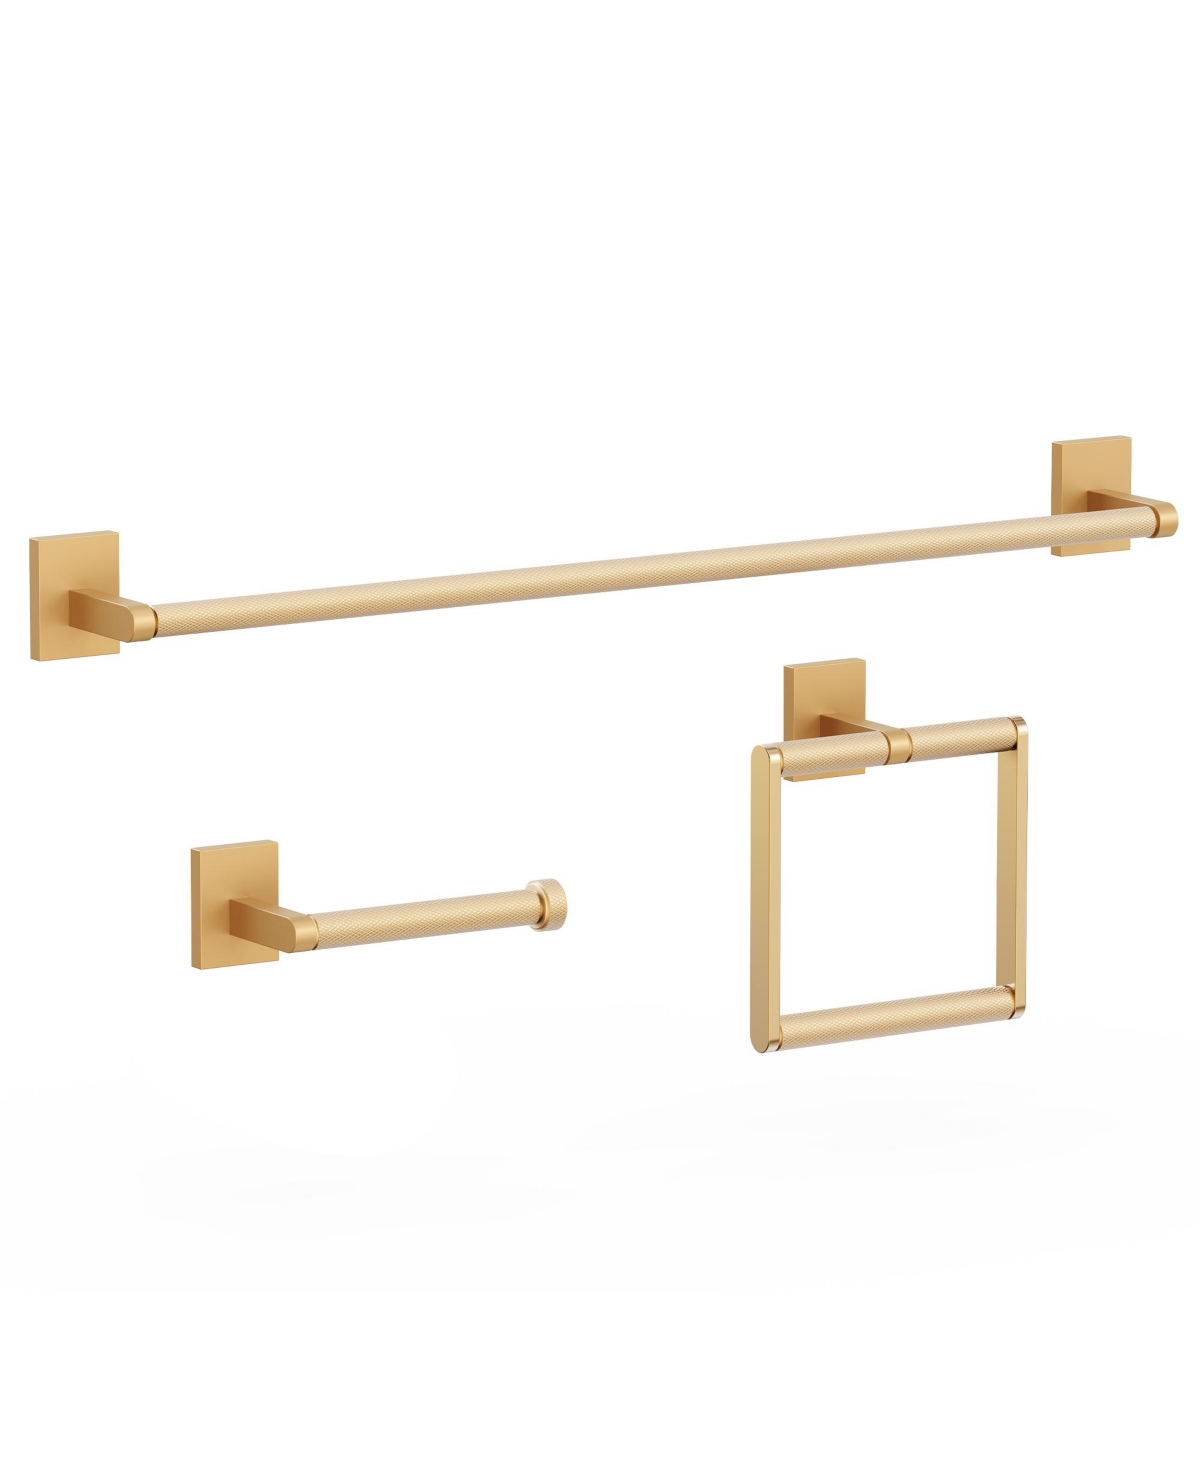 3-Piece Bath Hardware Set with Towel Ring Toilet Paper Holder and 24 in. Towel Bar in Brass - Gold